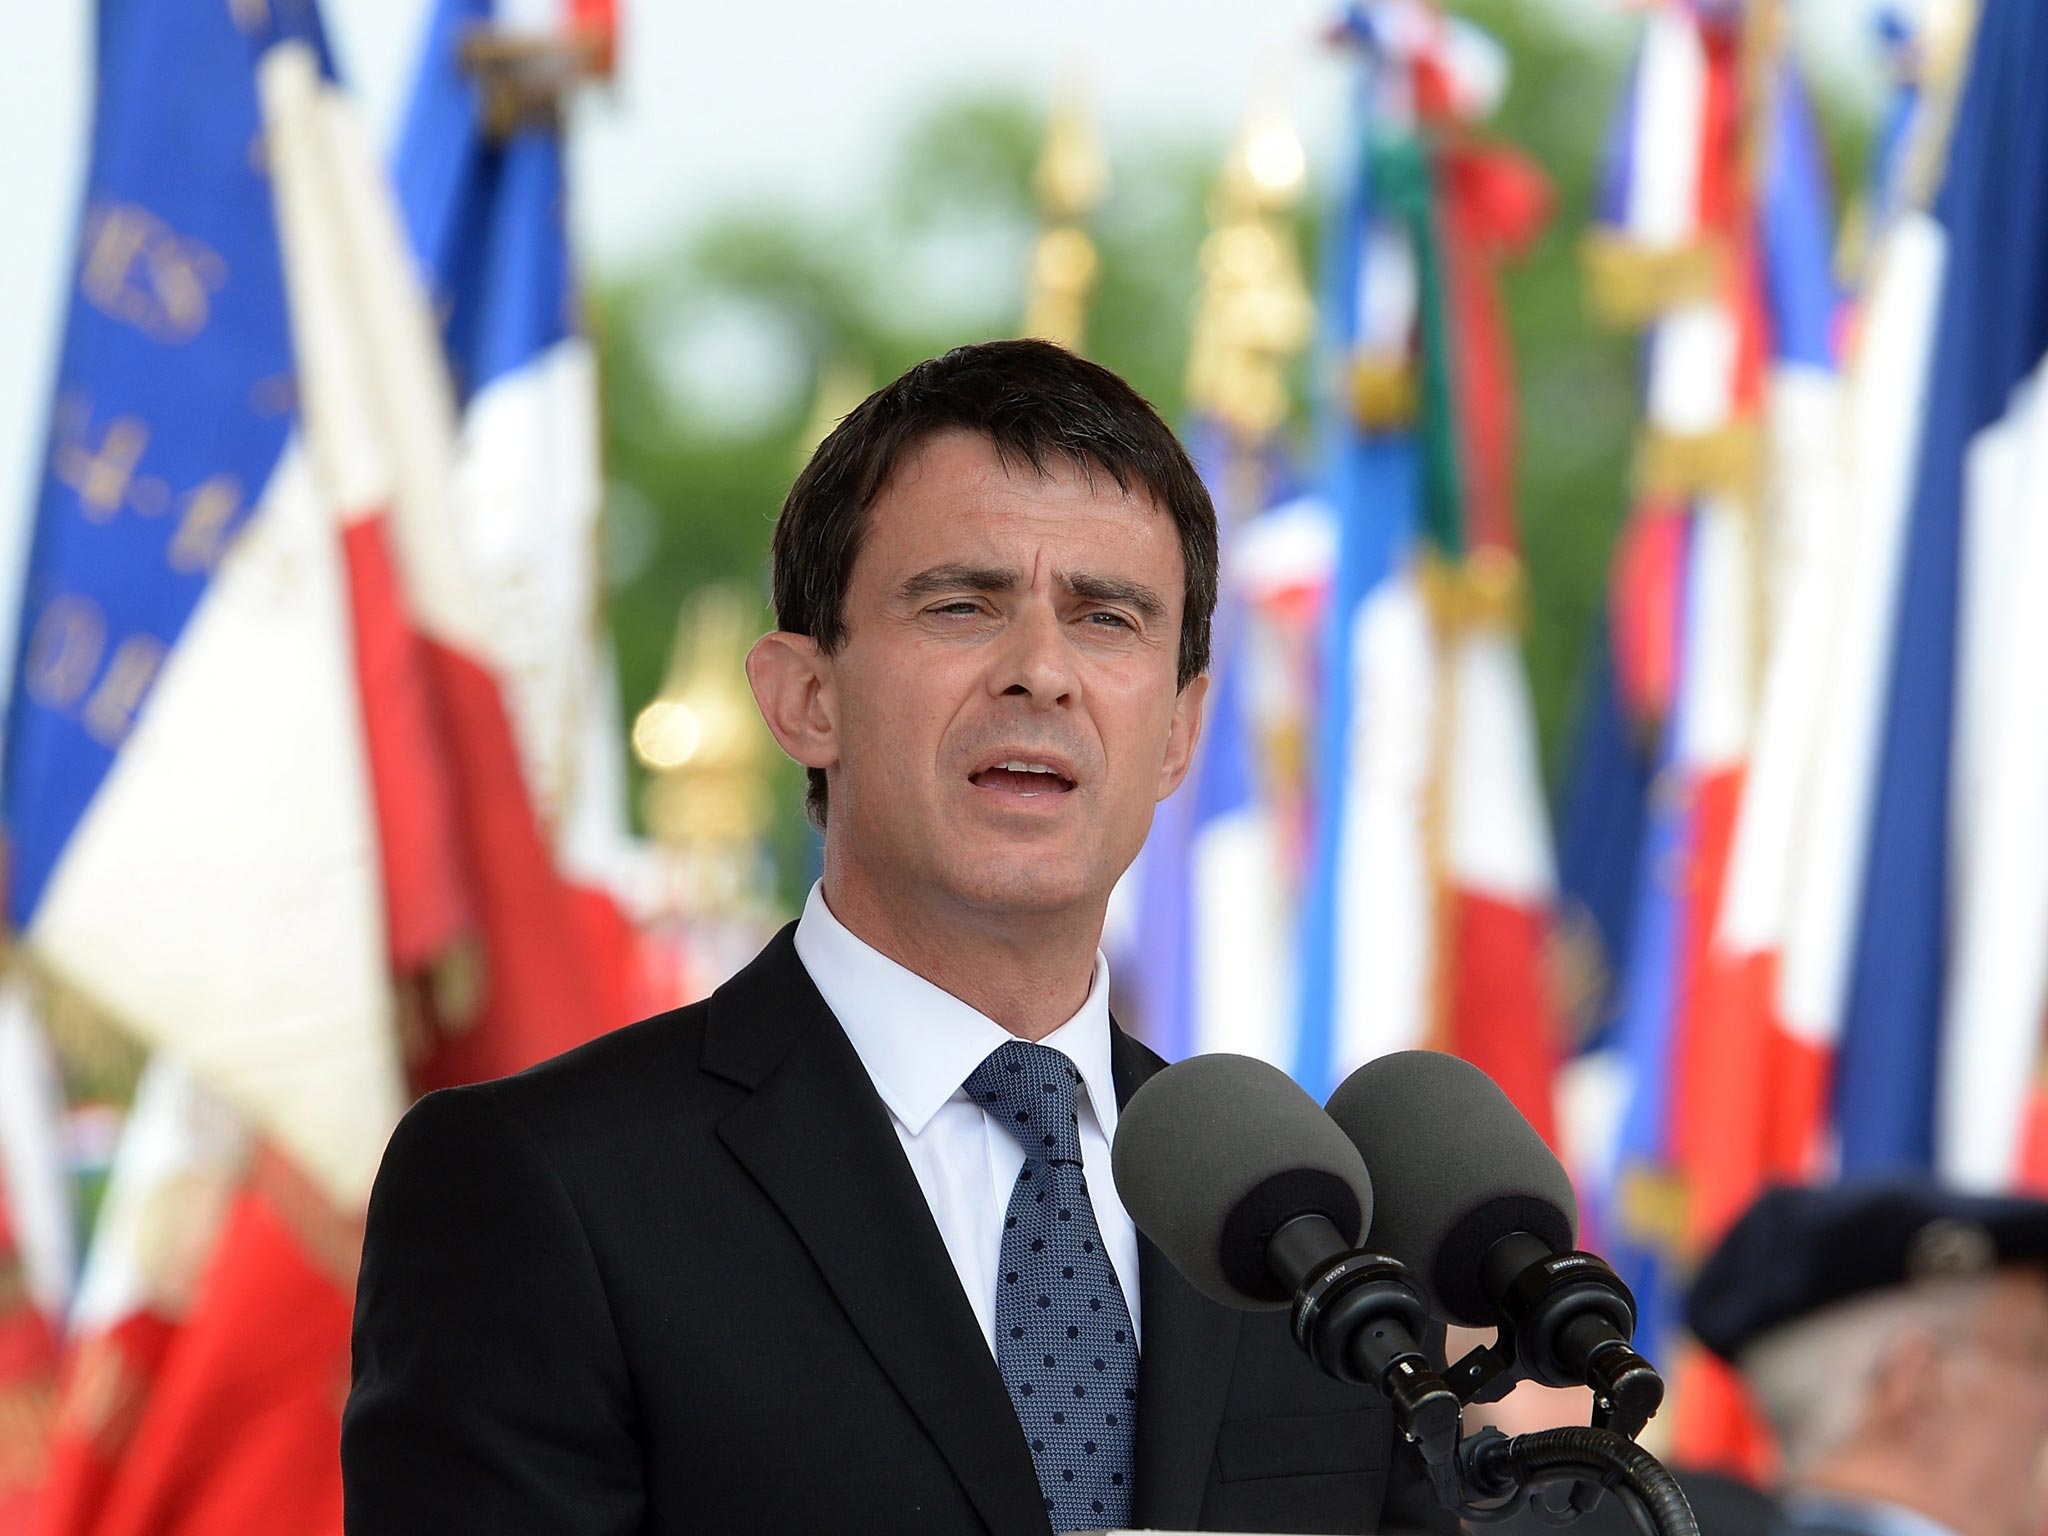 New prime minister Manuel Valls is struggling to contain in-fighting